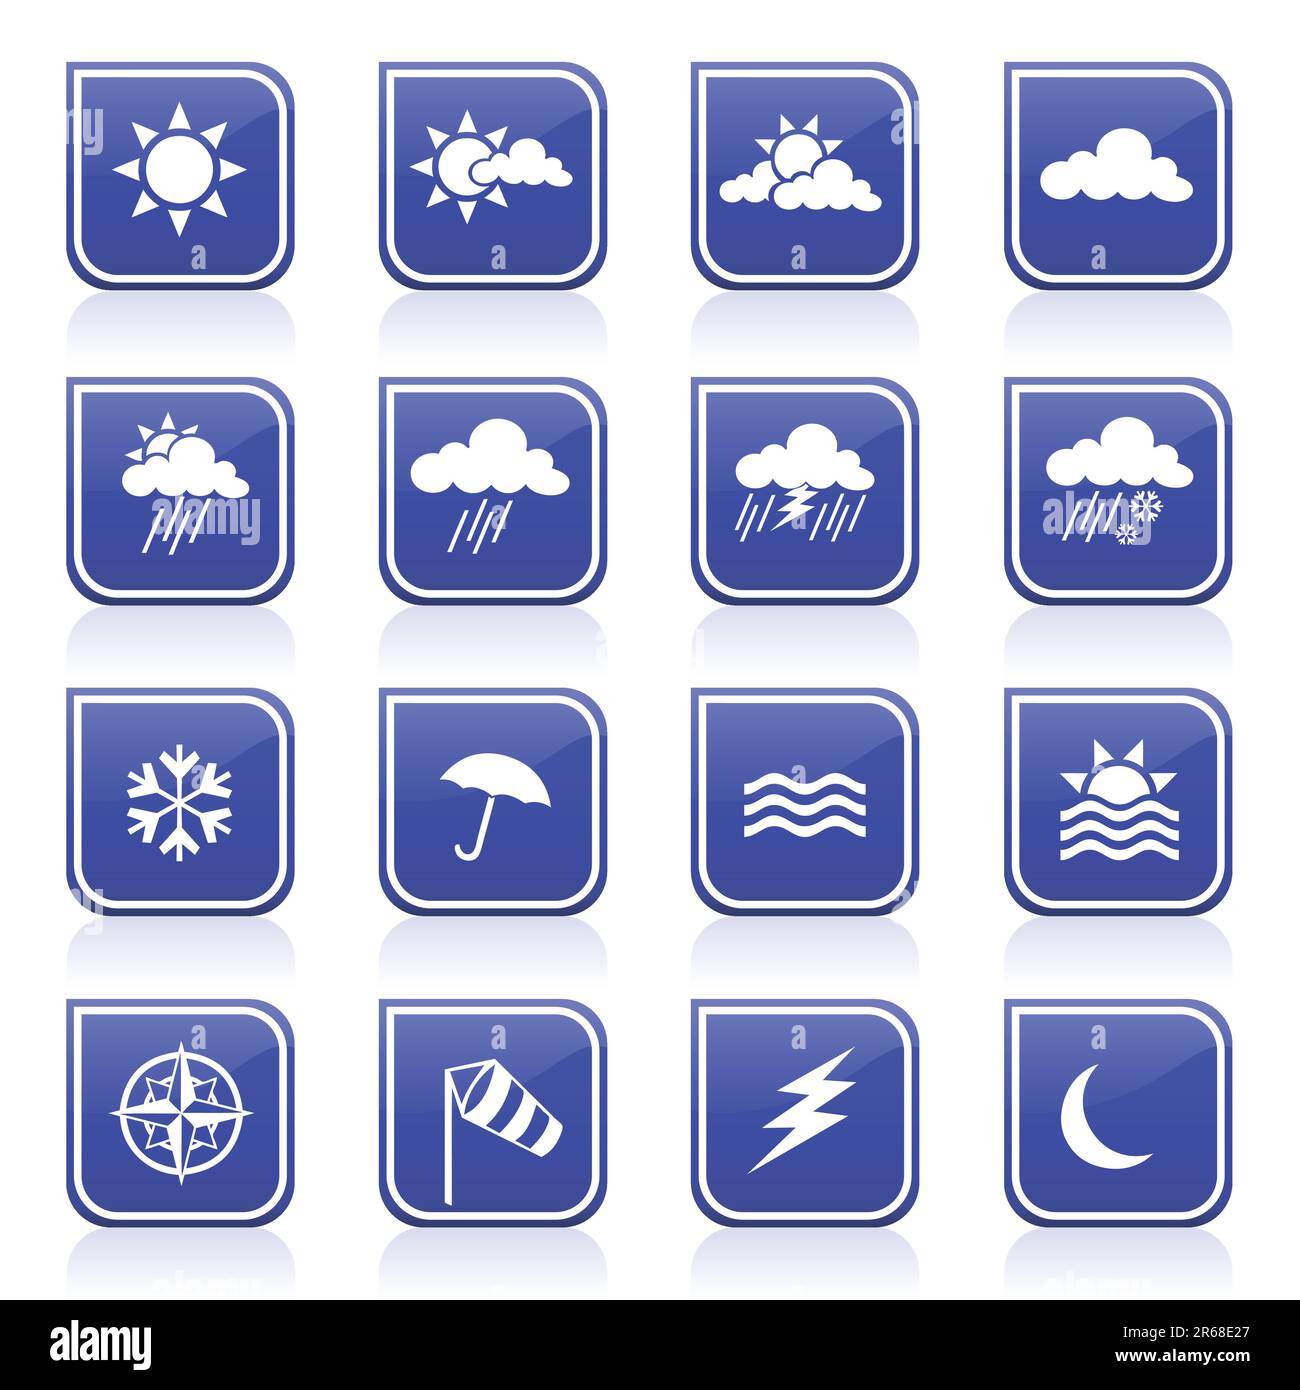 vector collection of weather icons Stock Vector